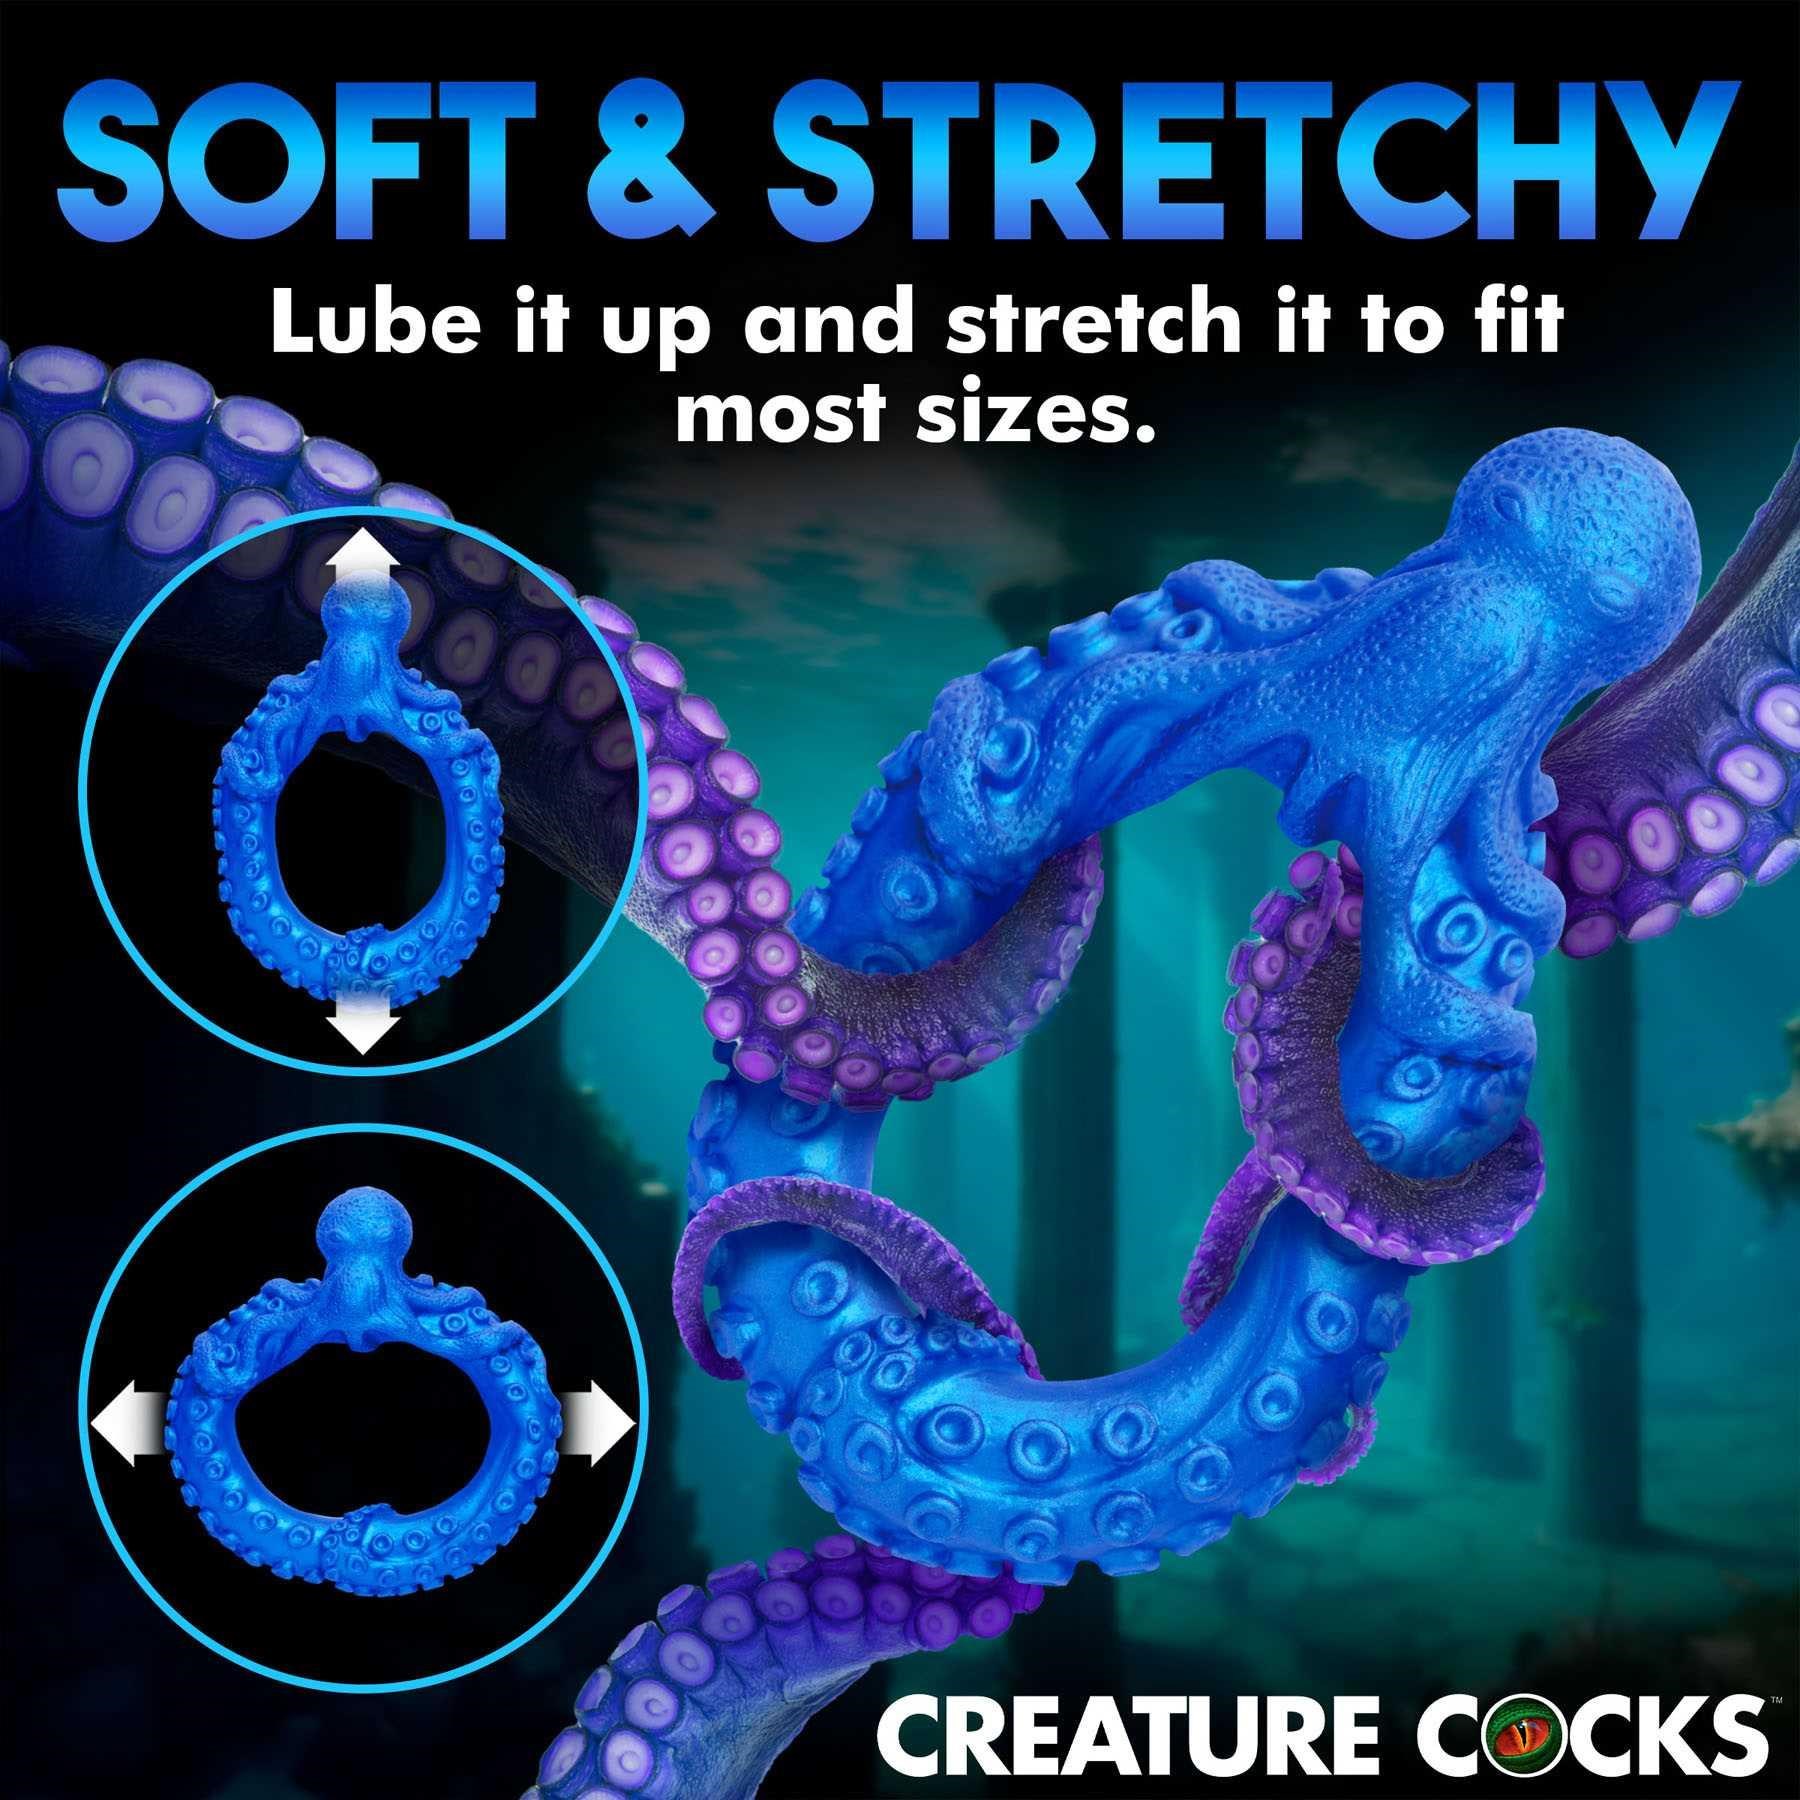 Creature Cocks Poseidon's Octo-Ring Silicone Cock Ring features call out sheet #1